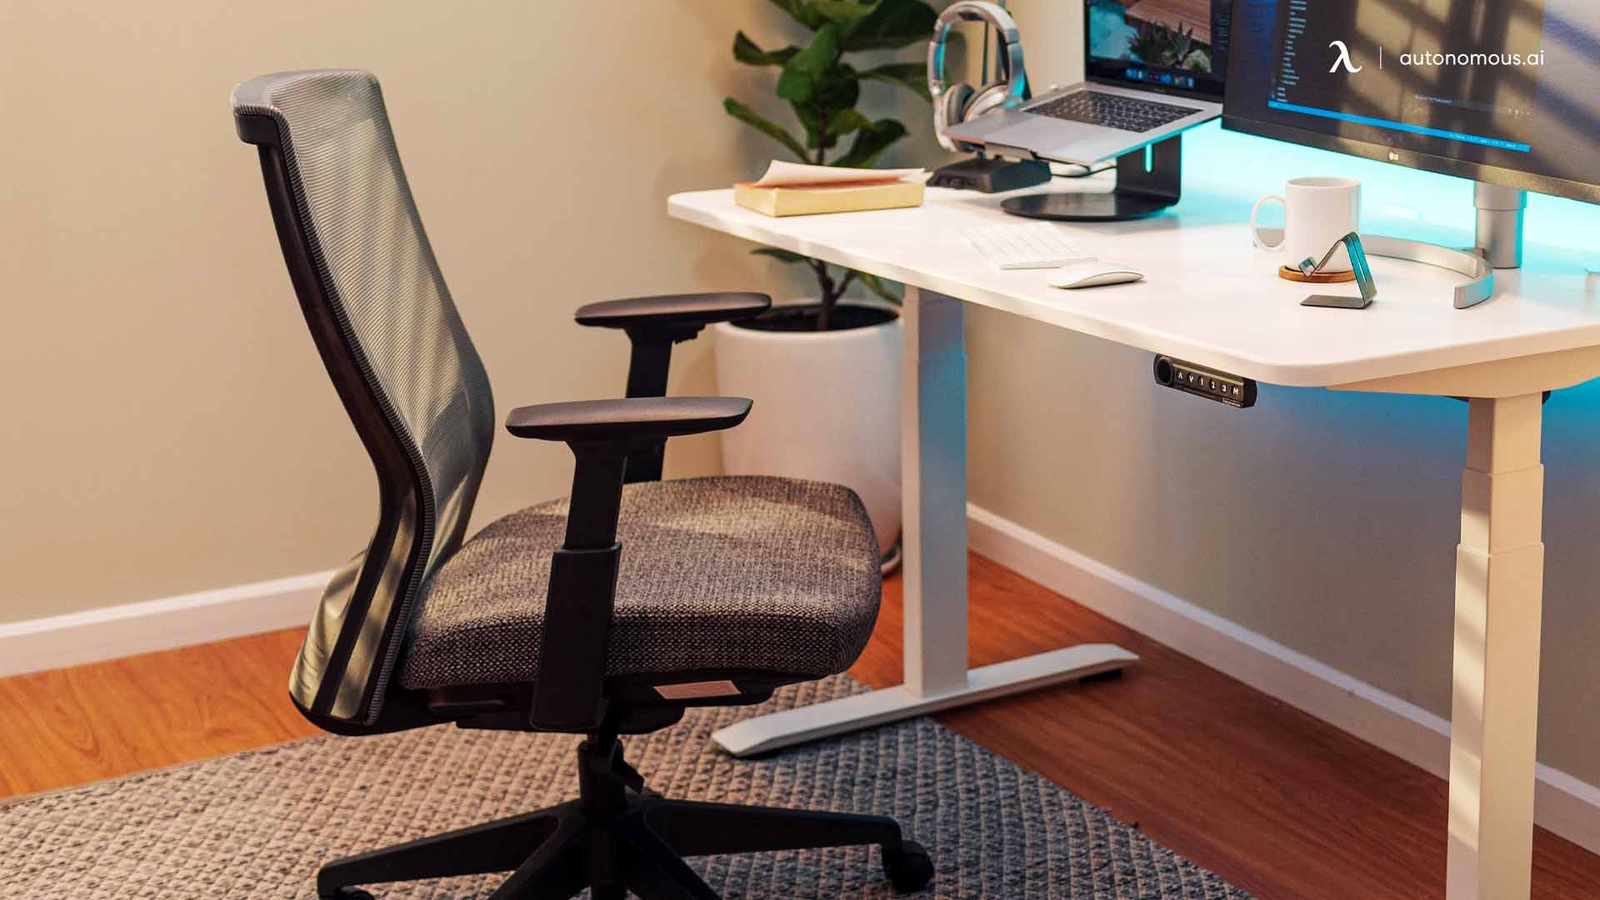 A Chair for Health: Exploring the Benefits of Ergonomic Seating